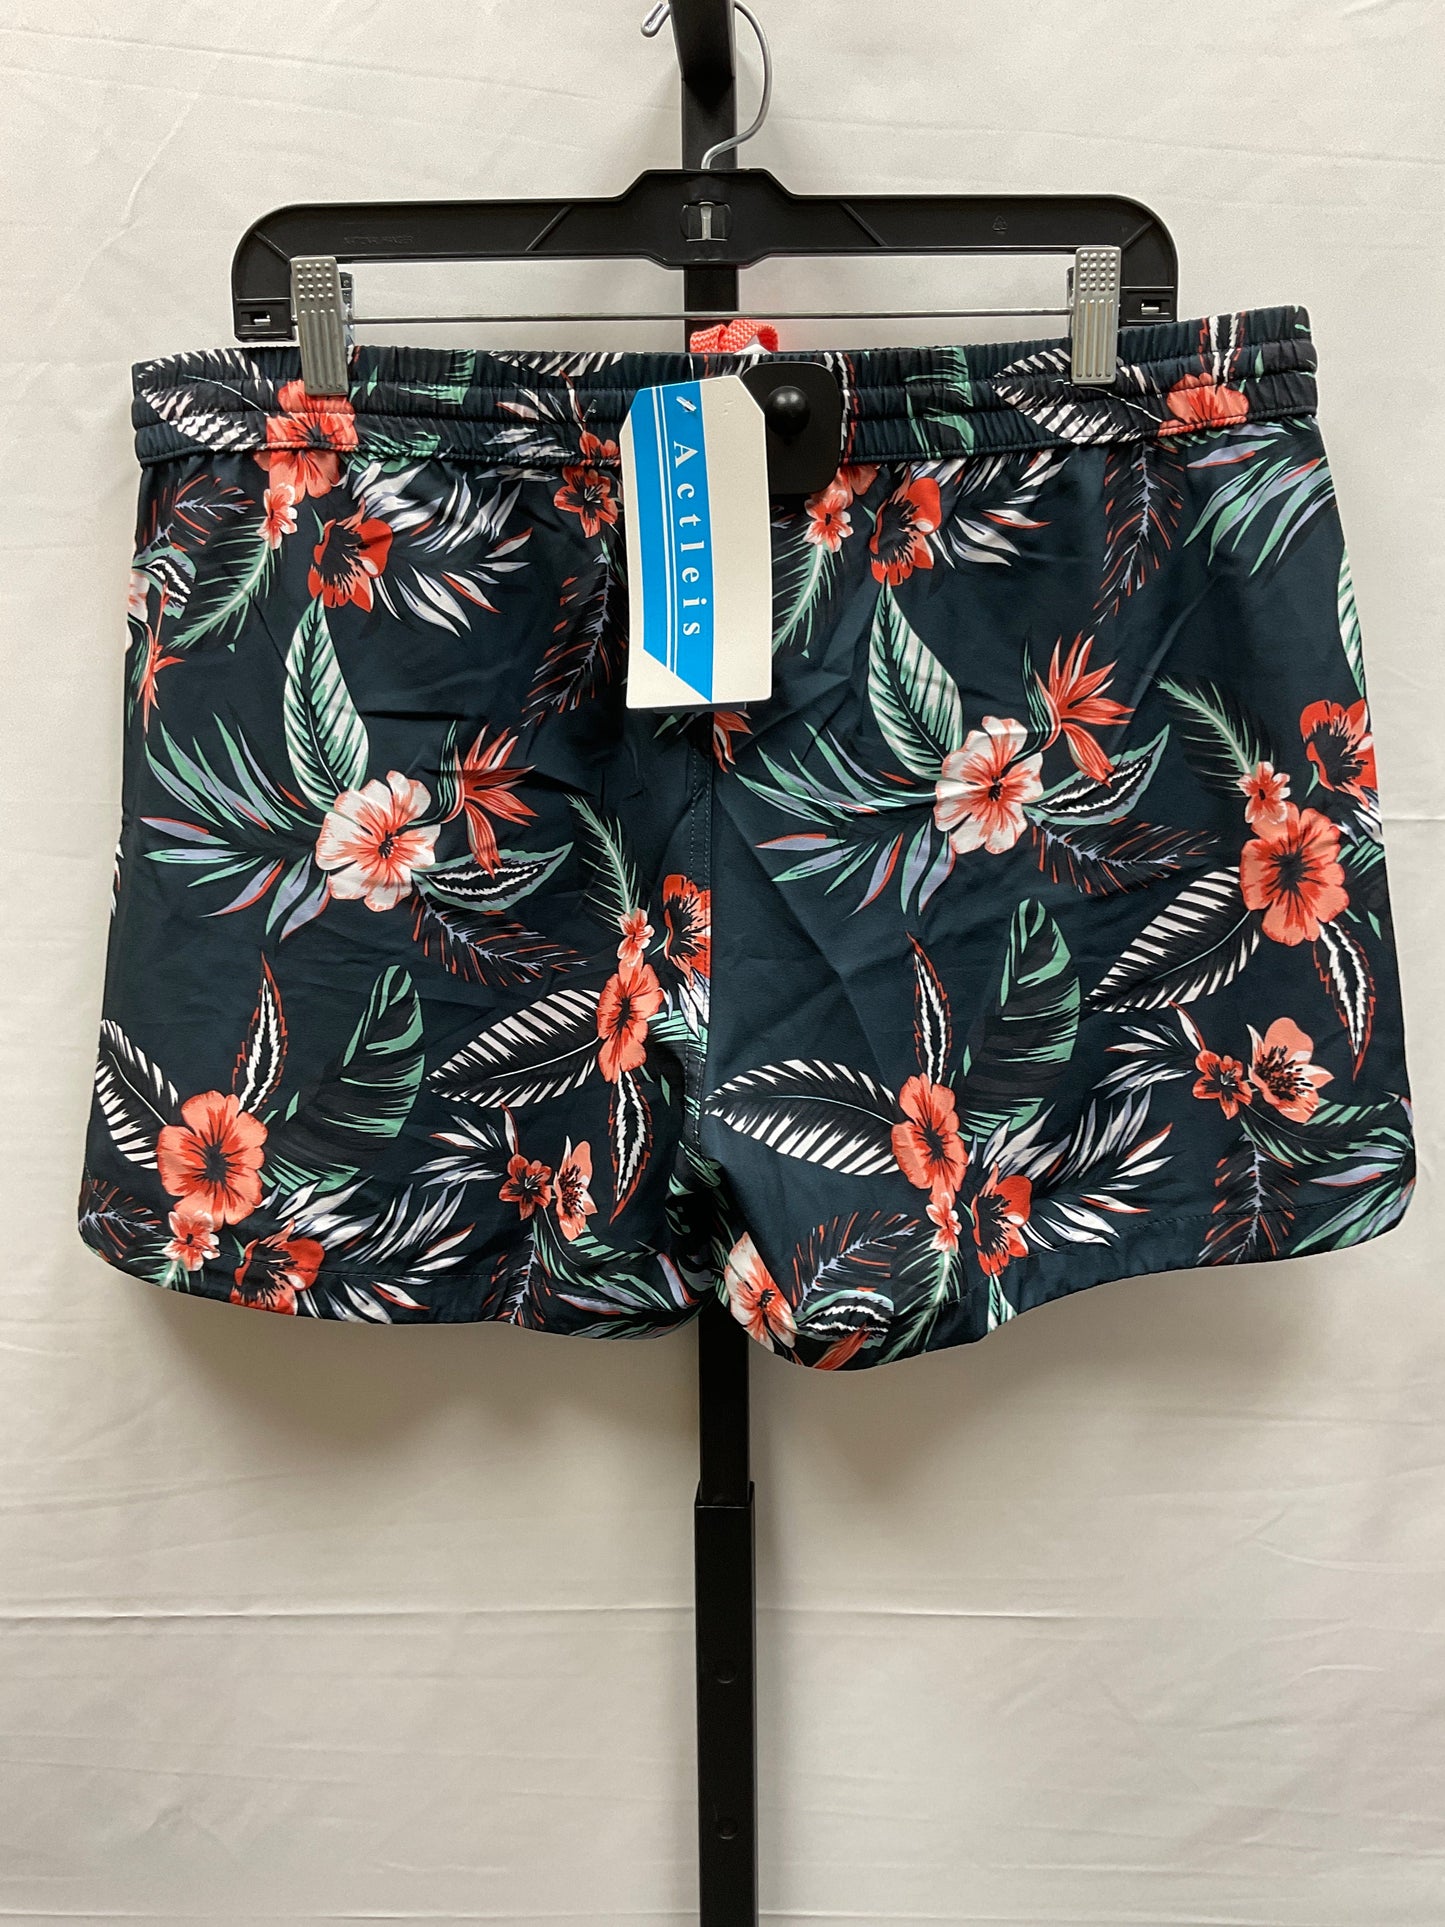 Tropical Print Athletic Shorts Clothes Mentor, Size Xl